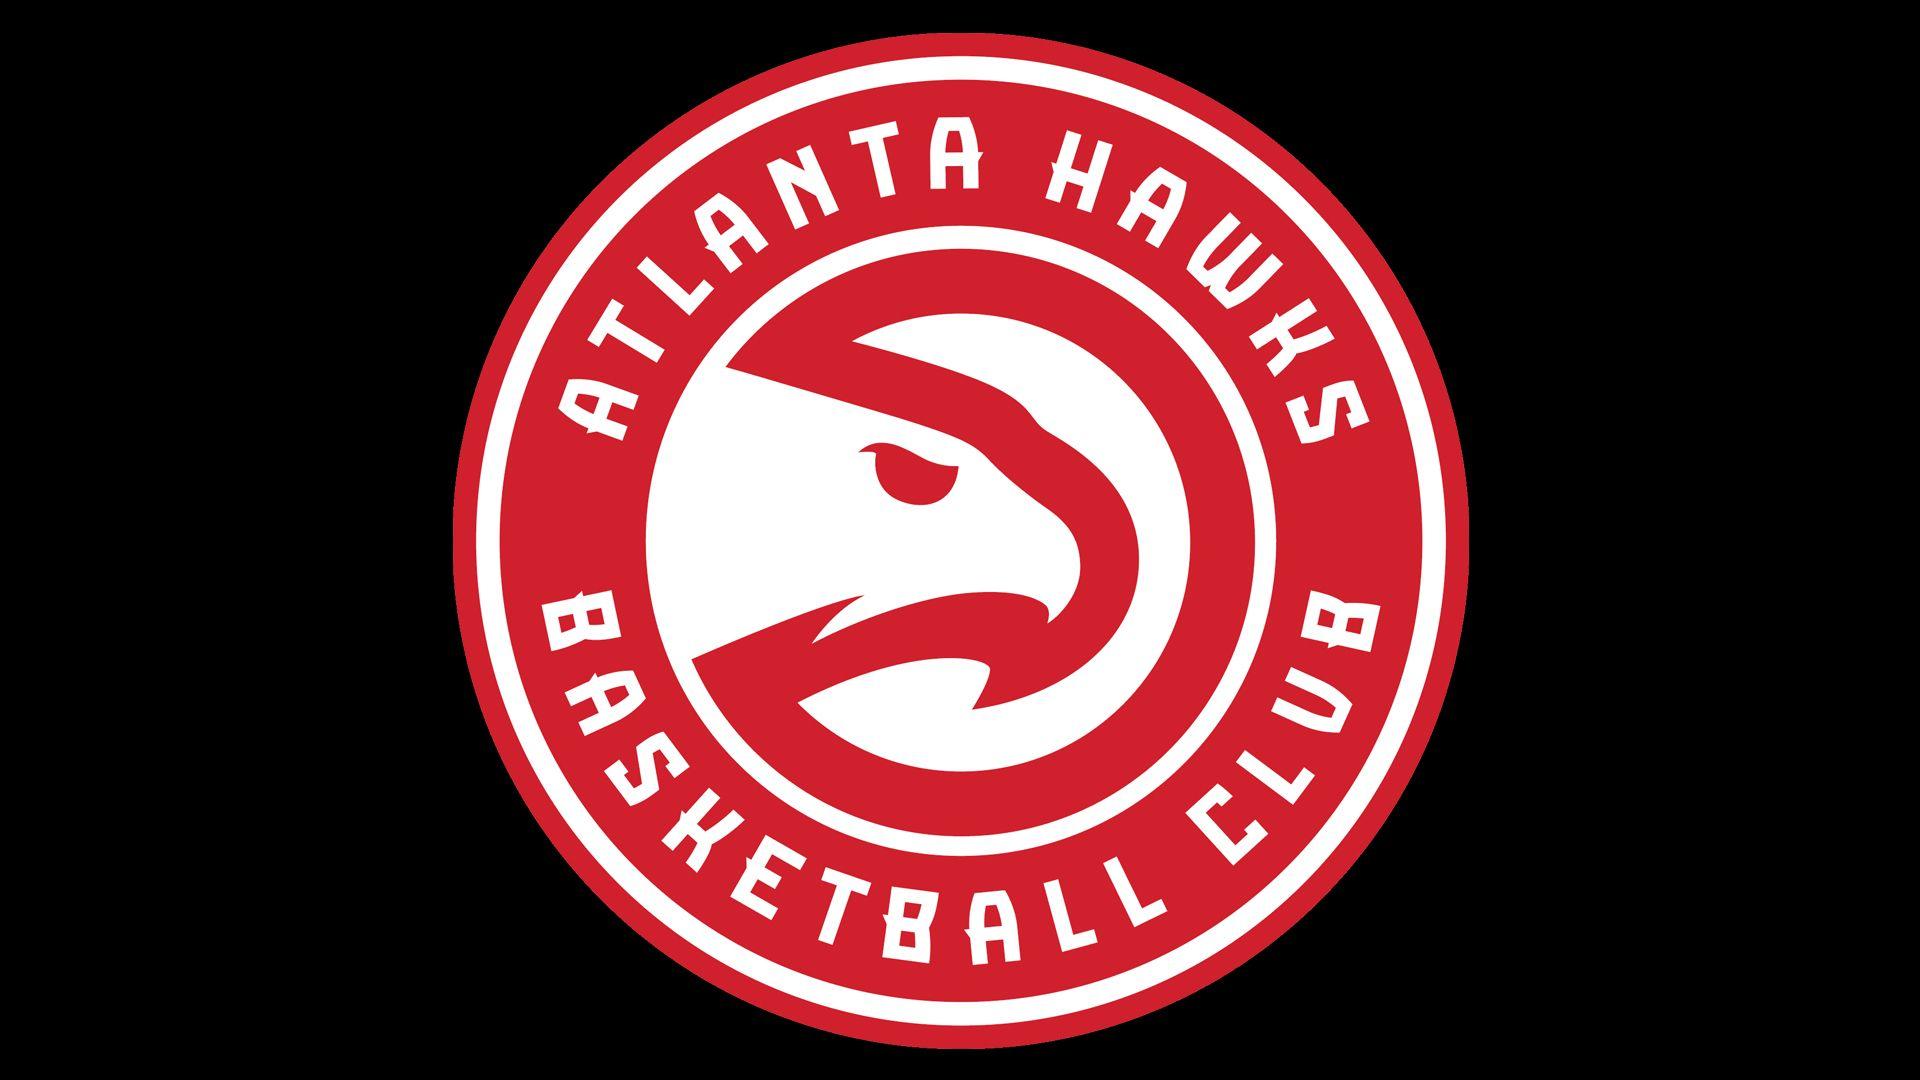 Hawks Logo - Atlanta Hawks Logo, Atlanta Hawks Symbol, Meaning, History and Evolution